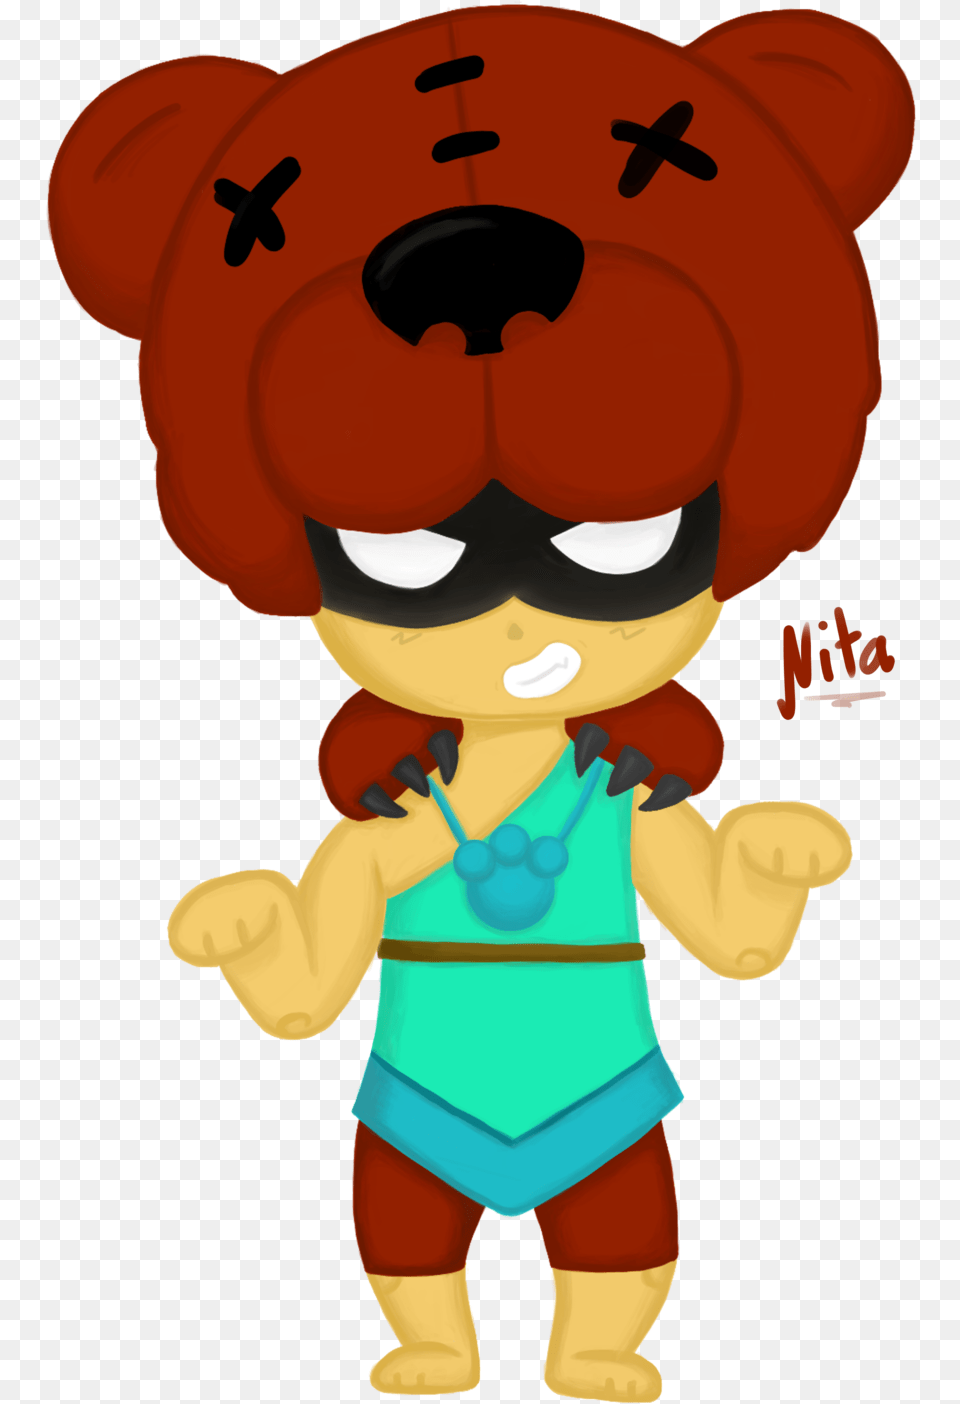 I Draw Nita From Brawl Stars Game Uwufirst Time Drawing Perry Phineas Y Ferb Gif, Baby, Person, Mascot Free Png